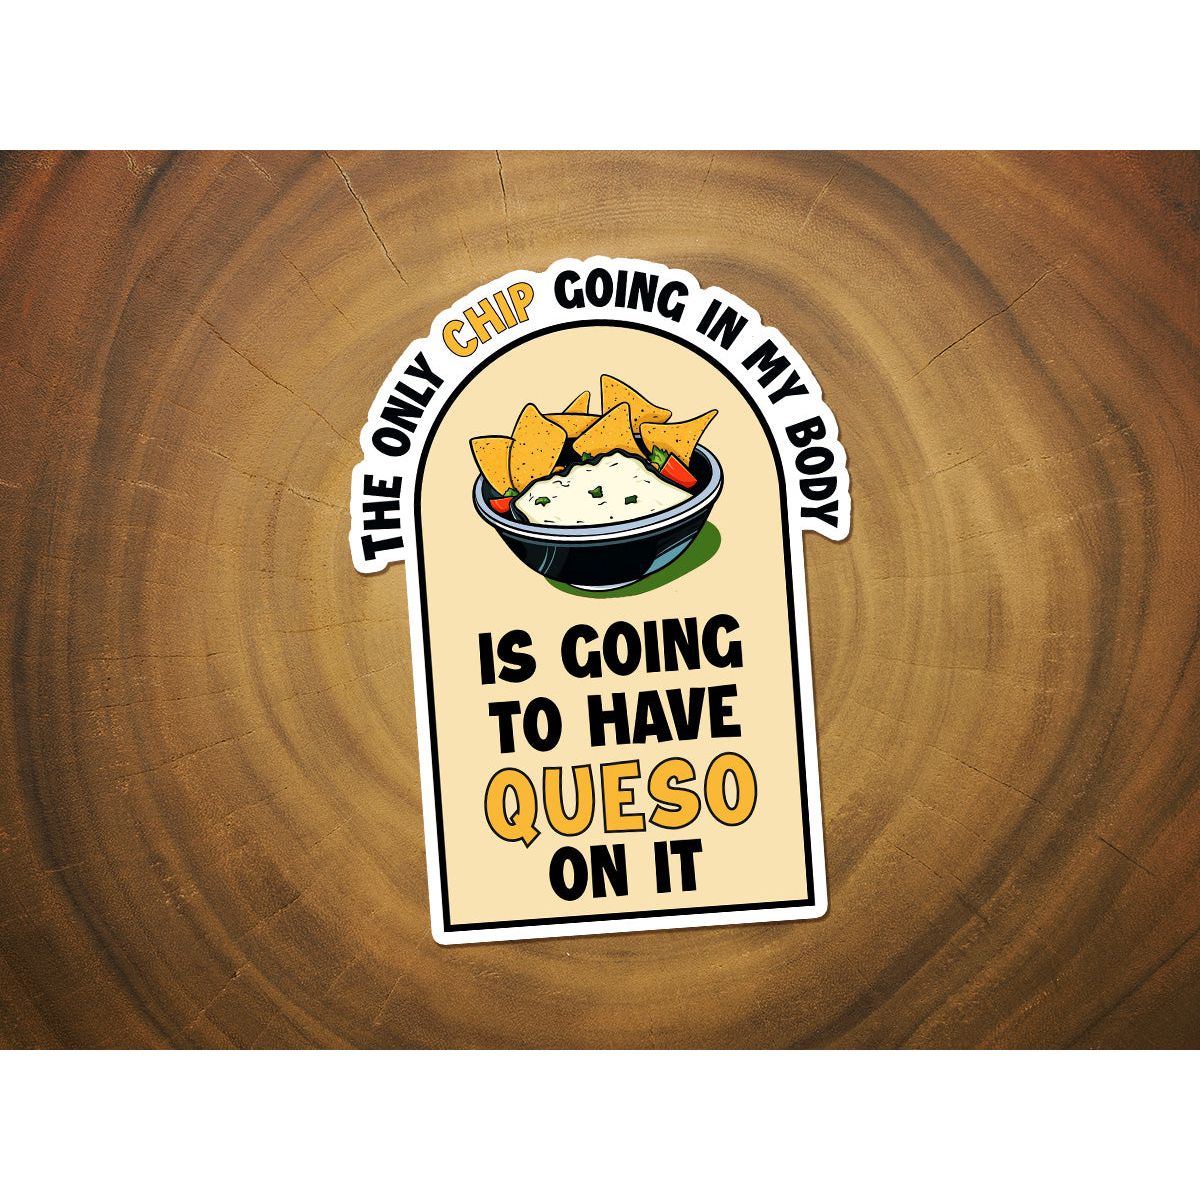 Chips and Queso | Funny Vinyl Sticker